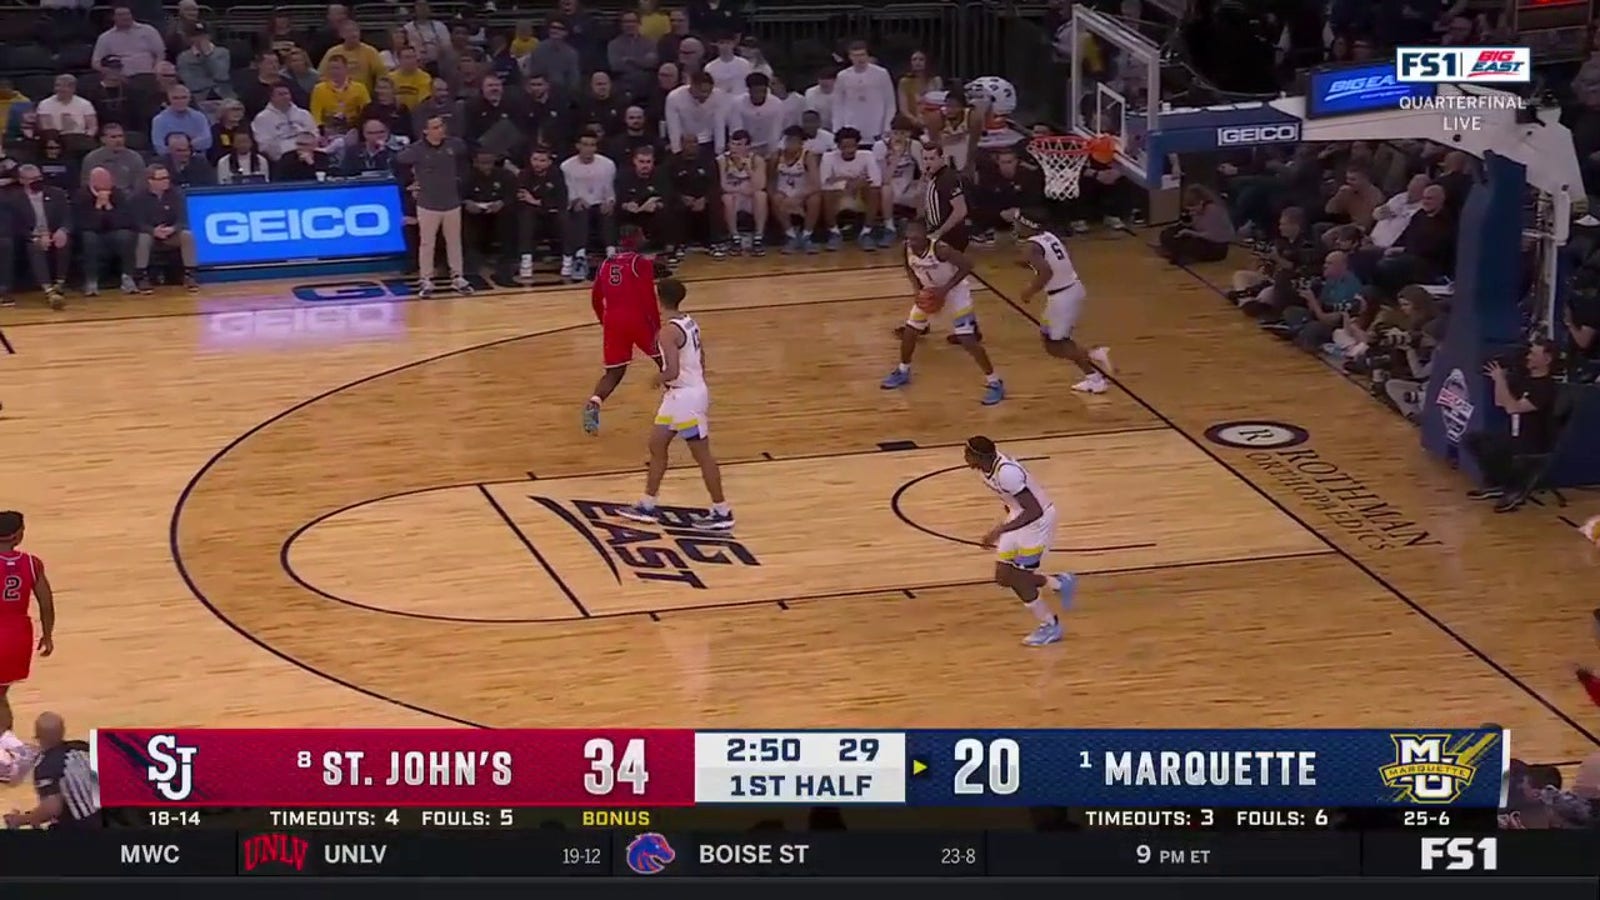 AJ Storr hits a WILD bank shot off glass to extend St. John's first-half lead